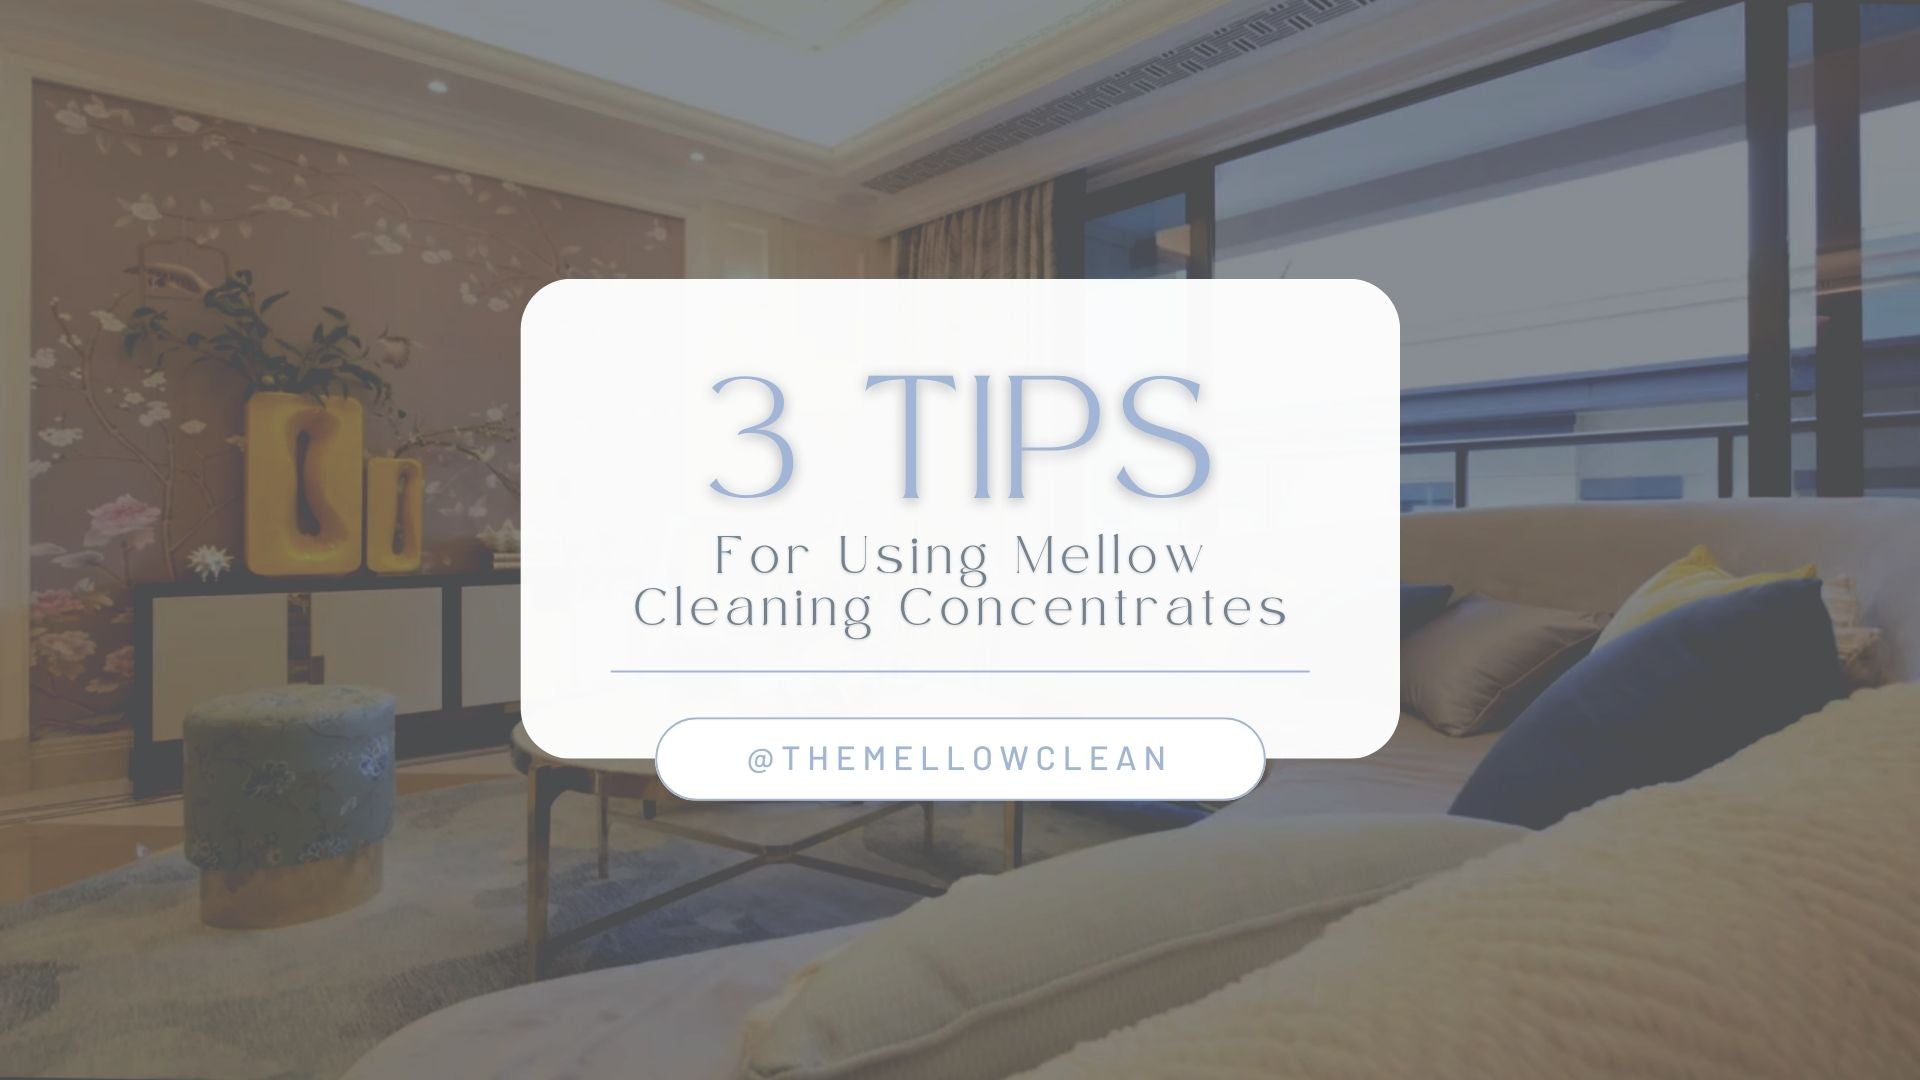 THE complete home-keeping kit — Mello Cleaning Products